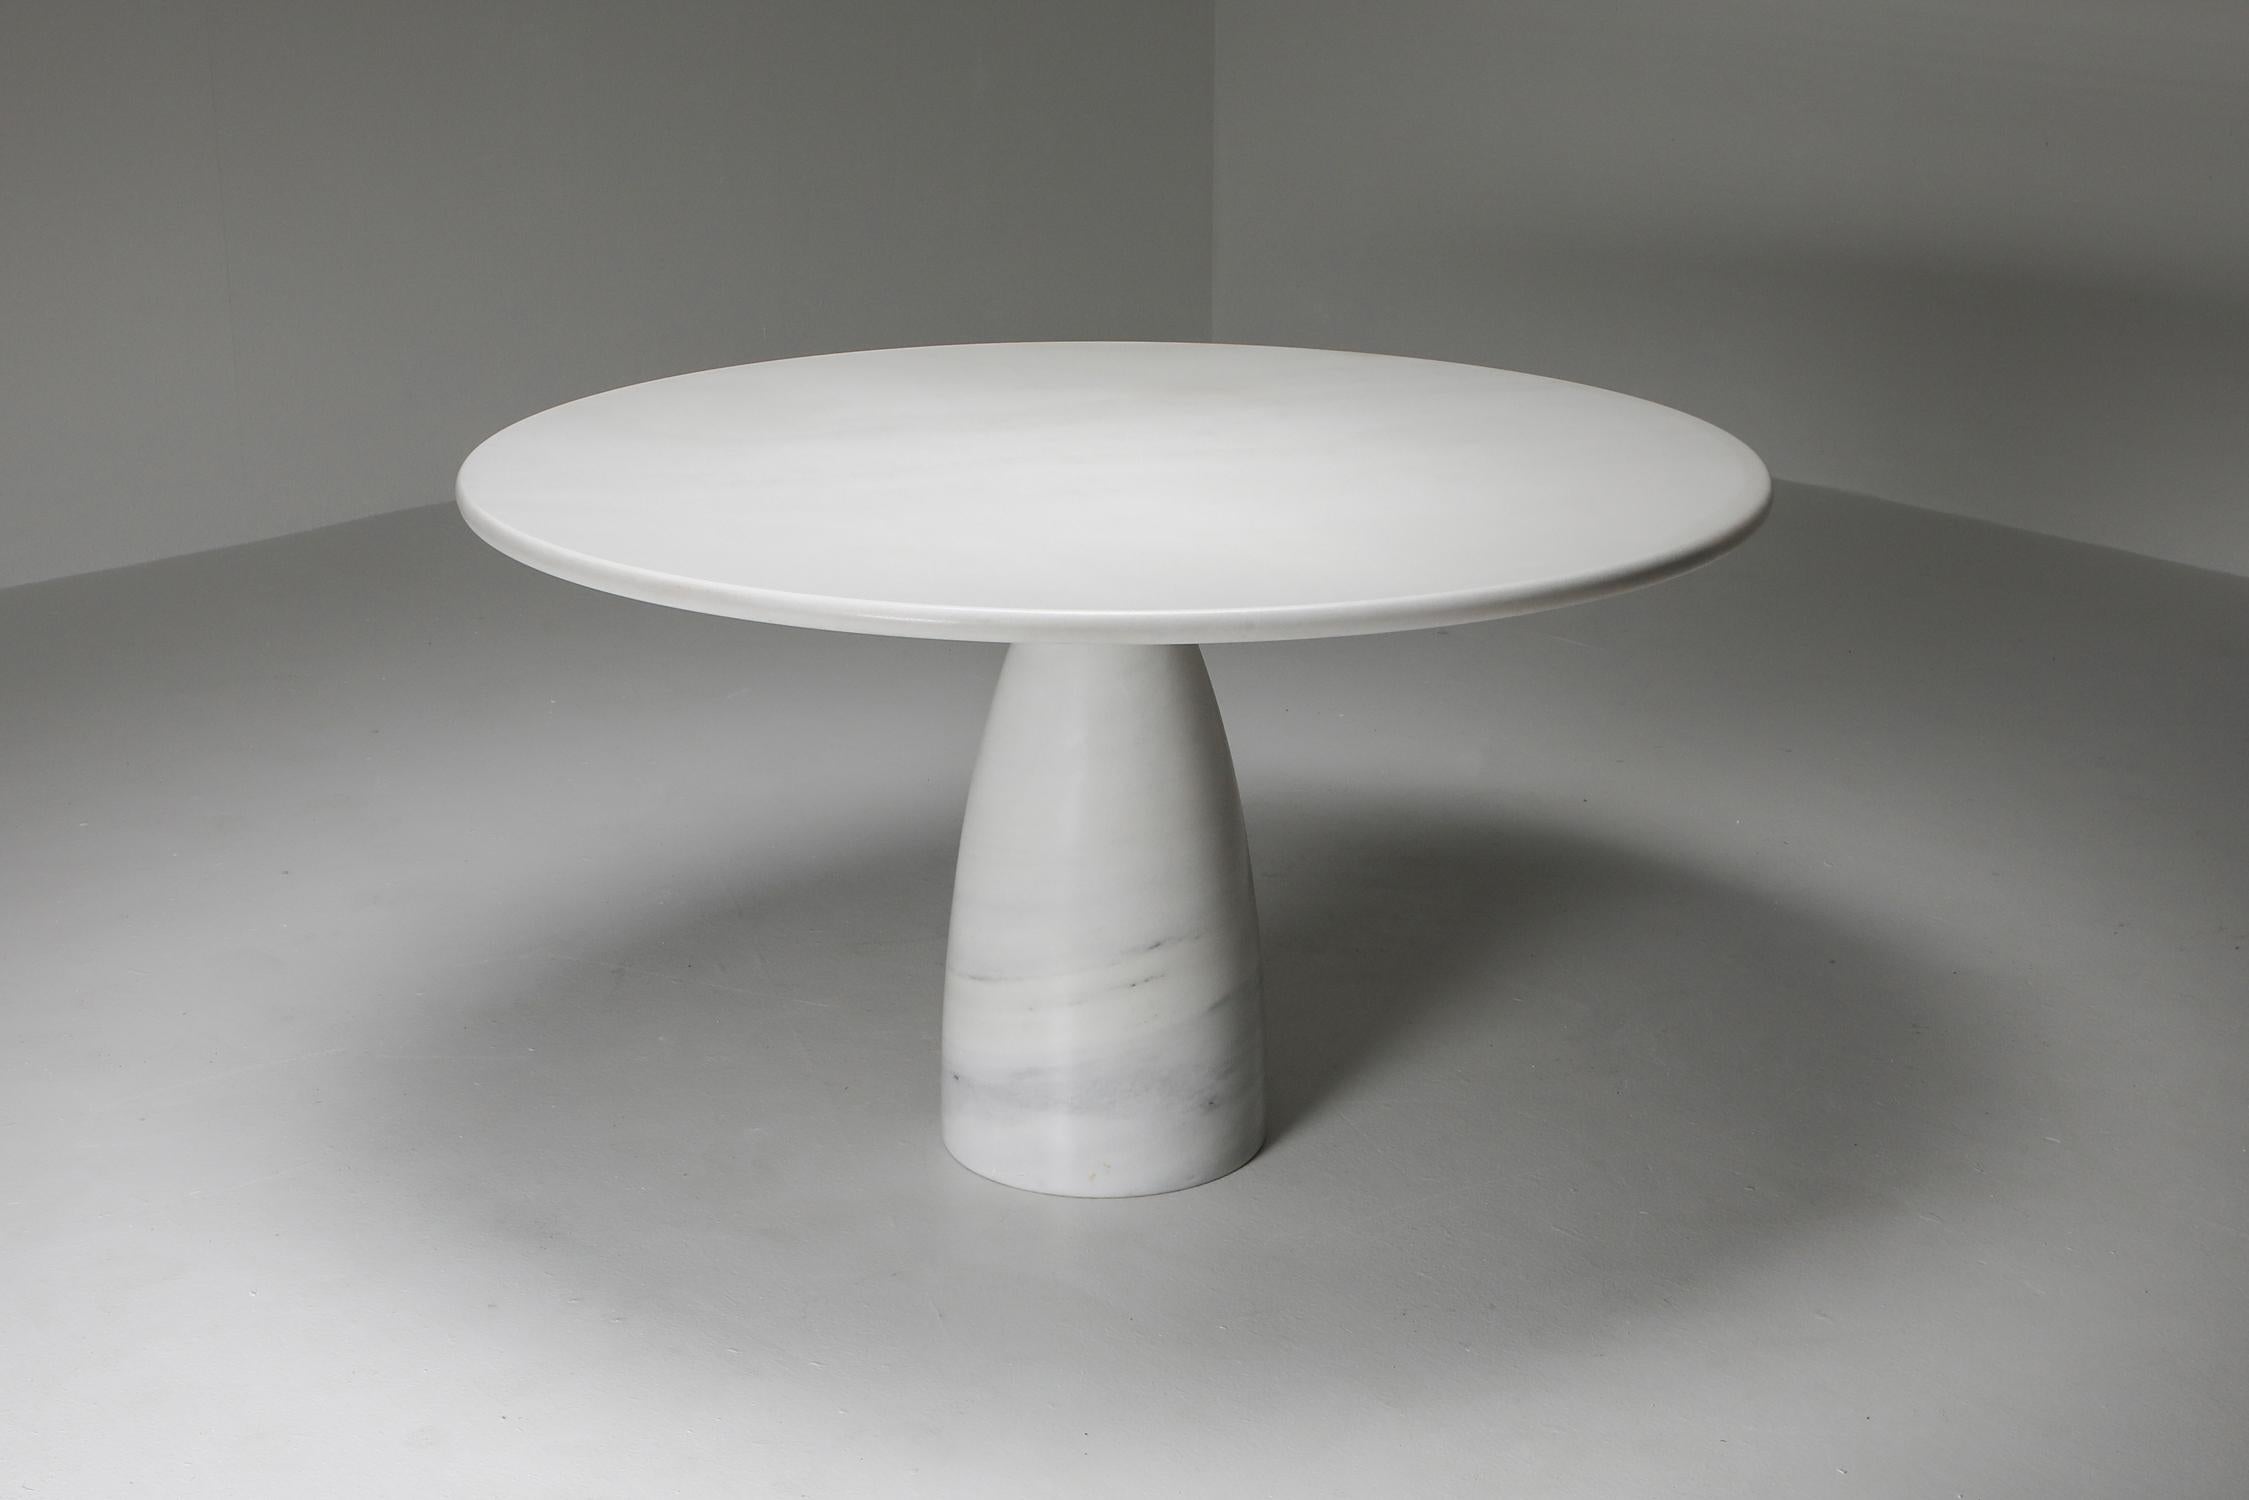 Calacatta white marble dining table, model 'Finale', Peter Draenert, Germany, 1970

Iconic Postmodern piece
The whiter the marble is, the rarer and expensive it is.
We've matched the table with a set of six pigreco chairs.
  

